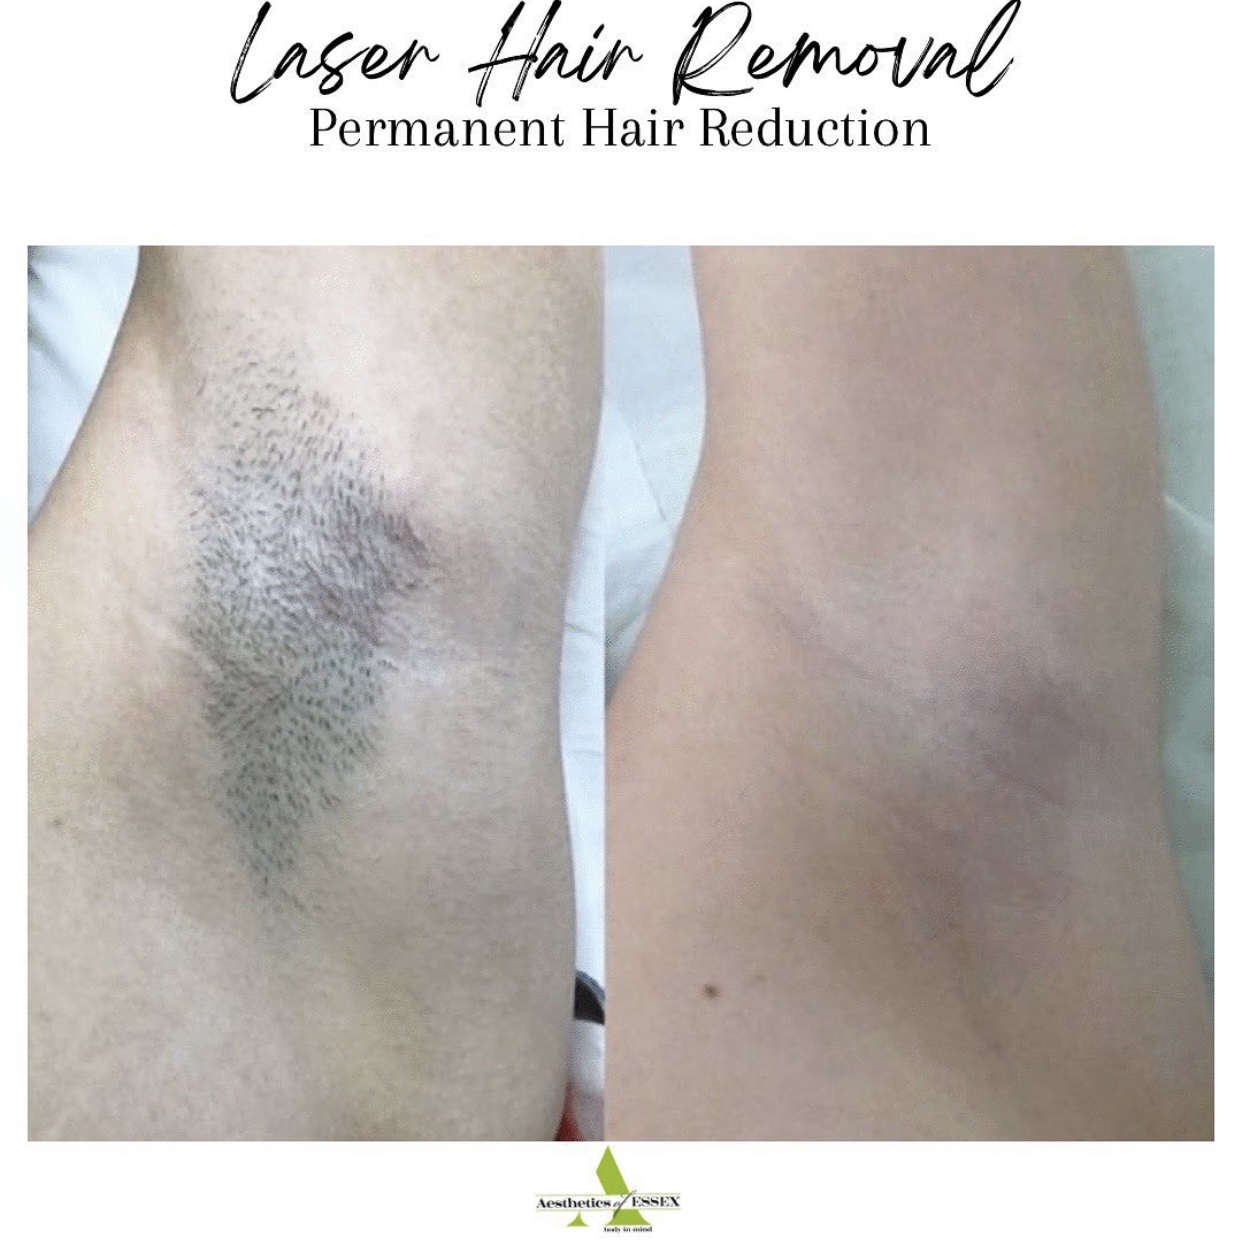 Laser Hair Removal - Aesthetics of Essex